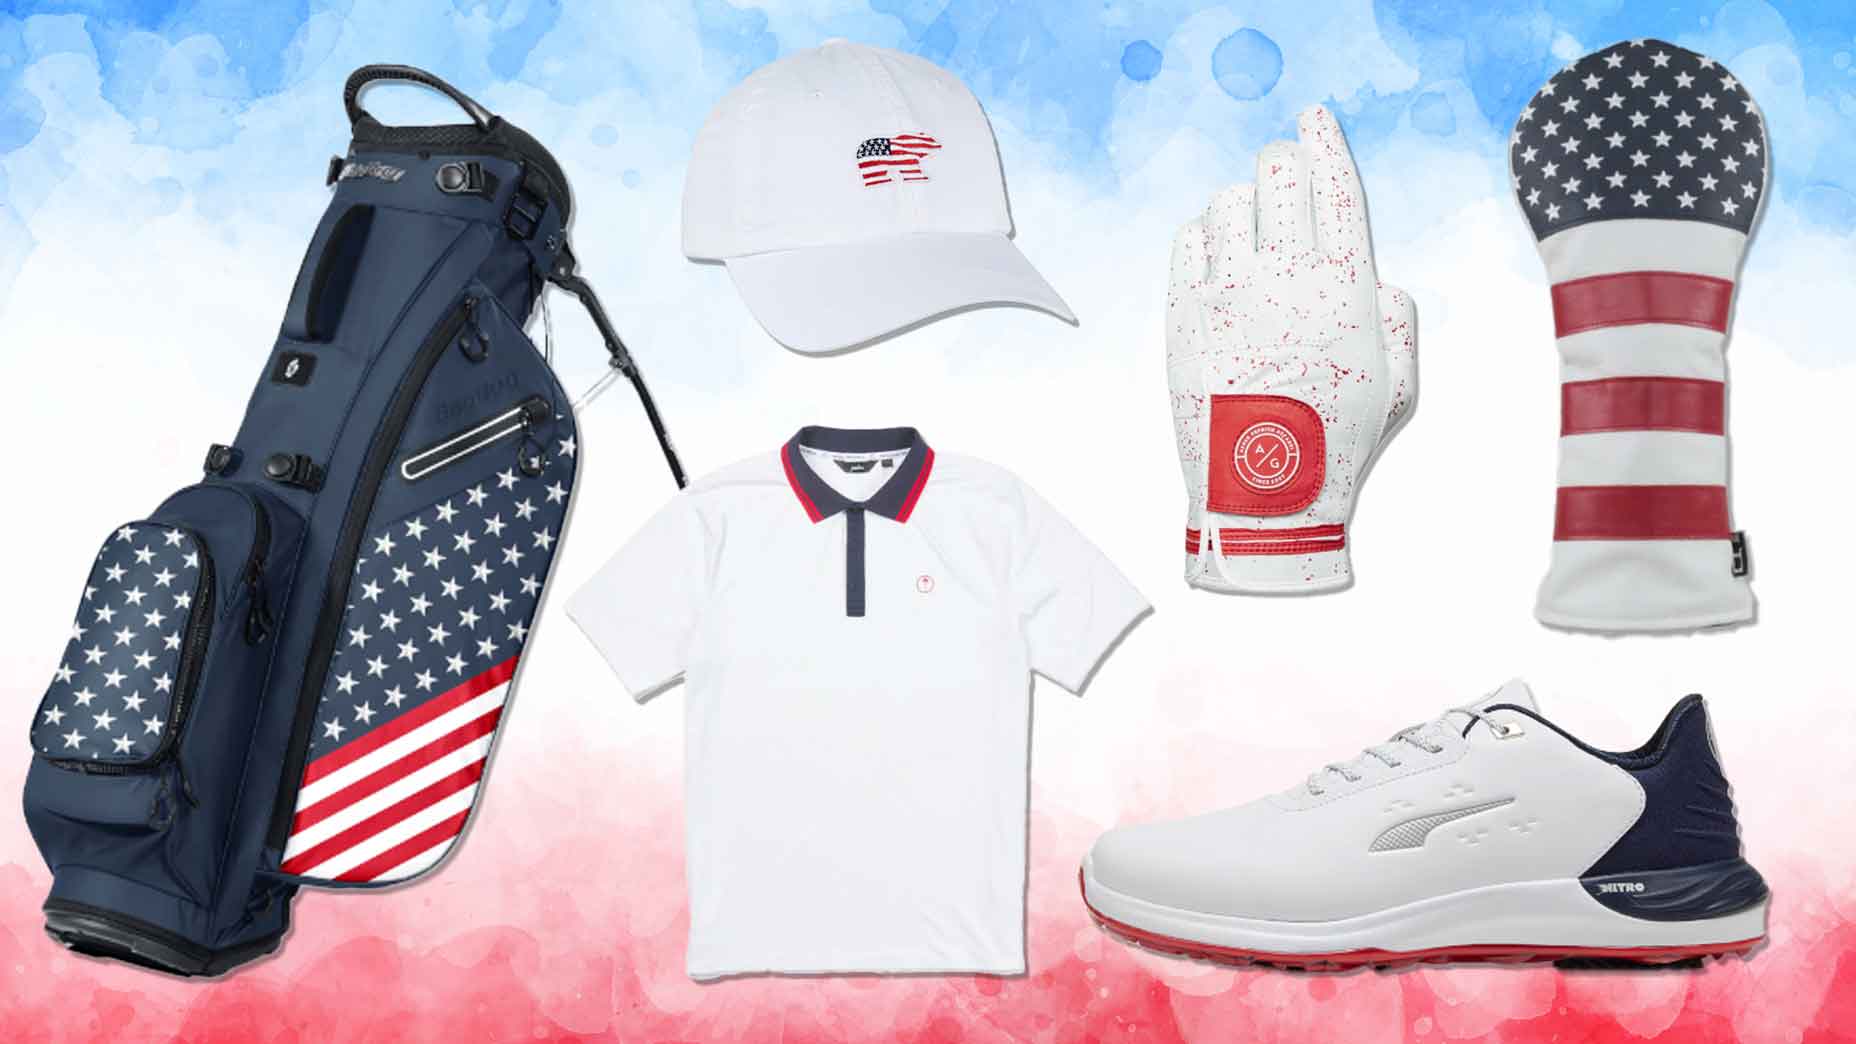 You are currently viewing Get ready for the 4th of July with Fairway Jockey’s red, white and blue gear